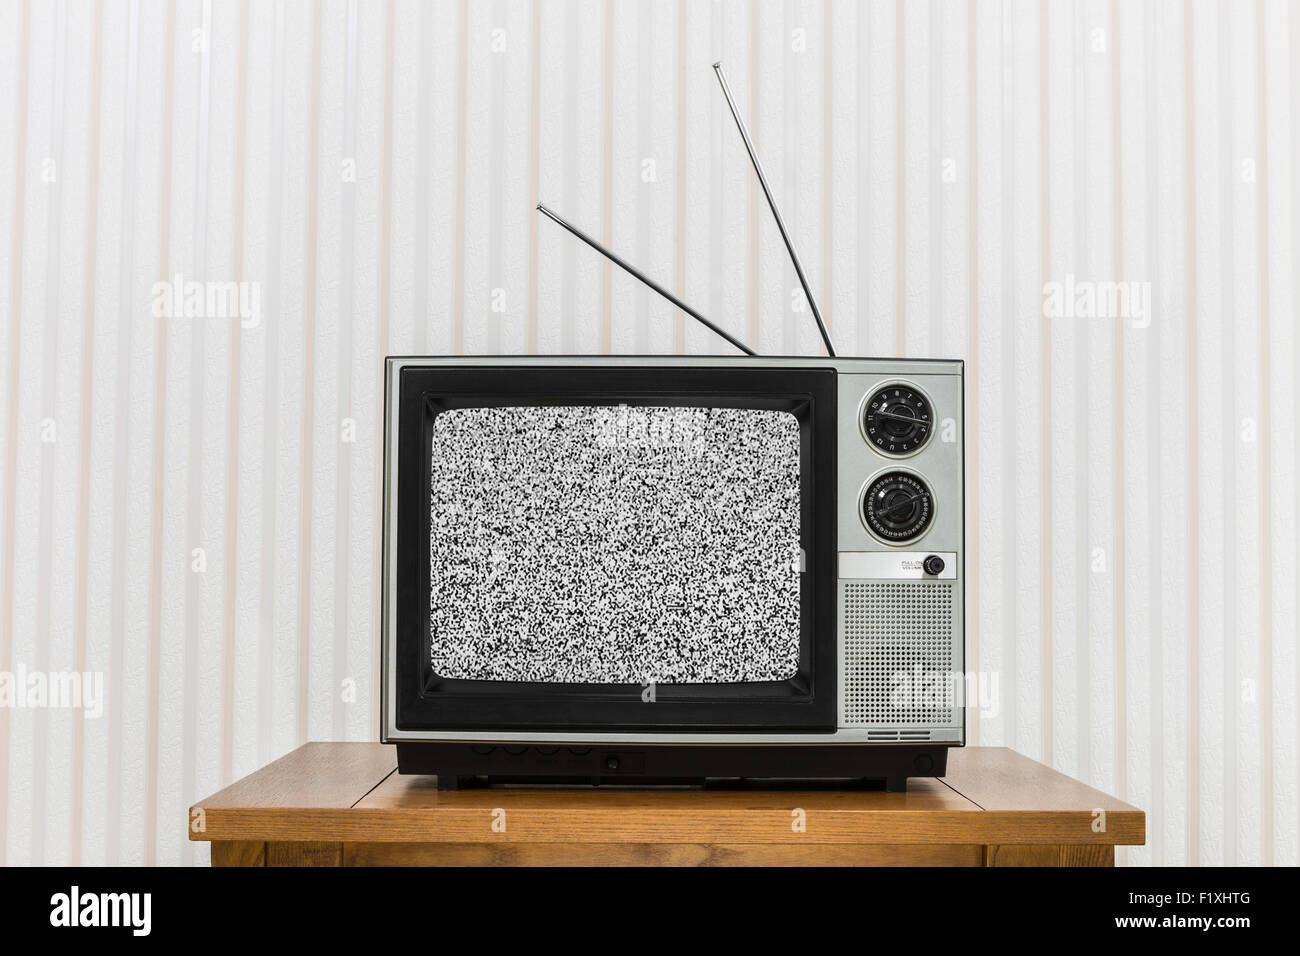 Old analogue television on wood table with static screen. Stock Photo